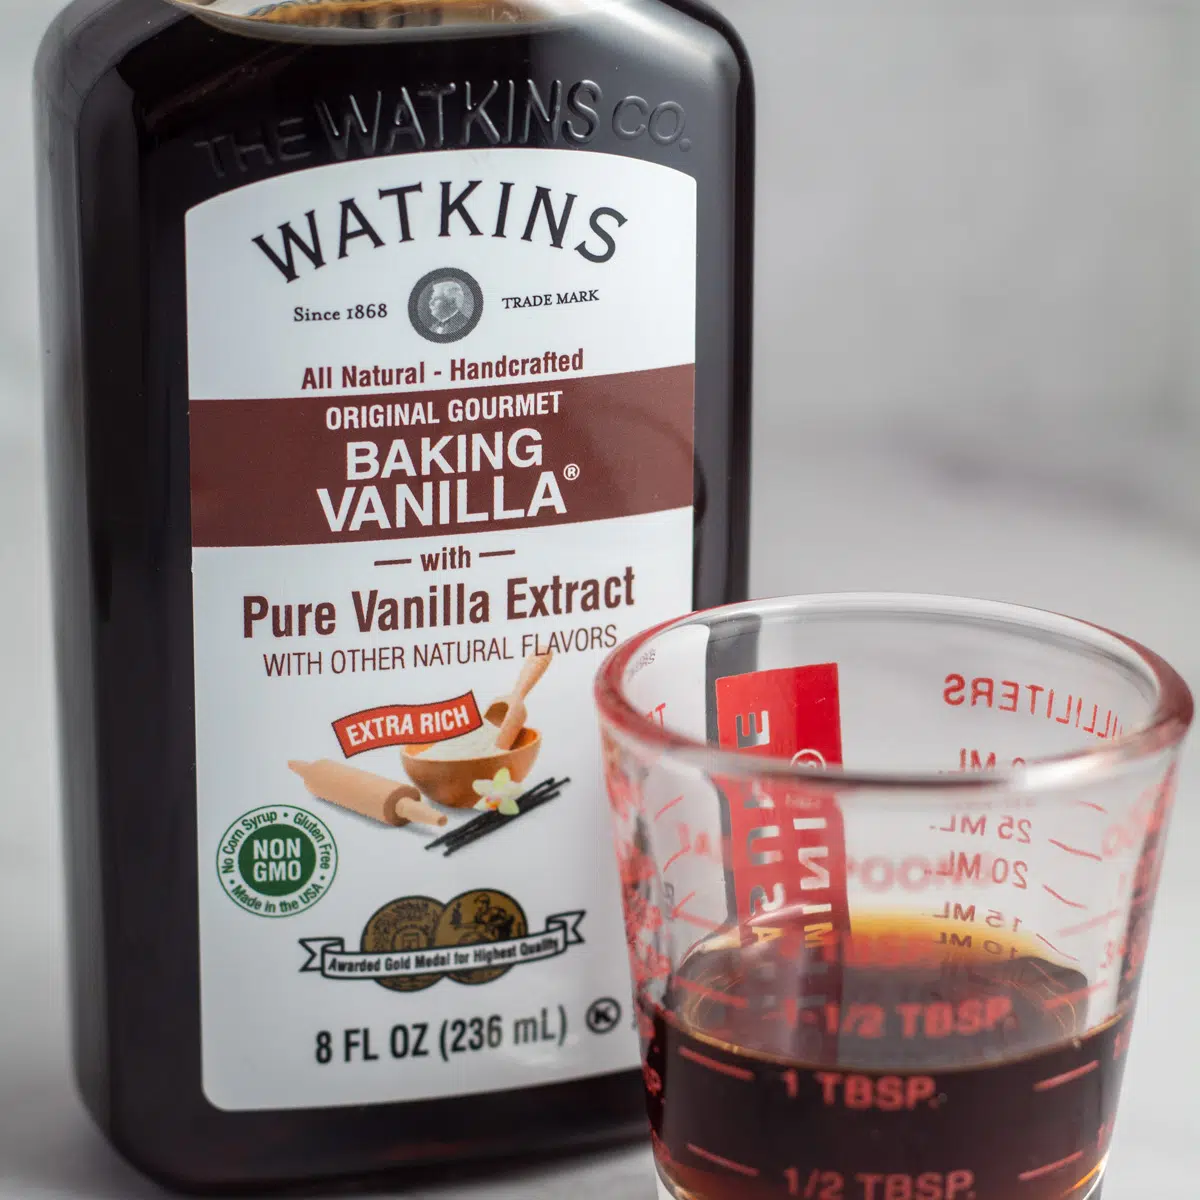 Vanilla extract substitute options with bottled vanilla and a portion in measuring cup.